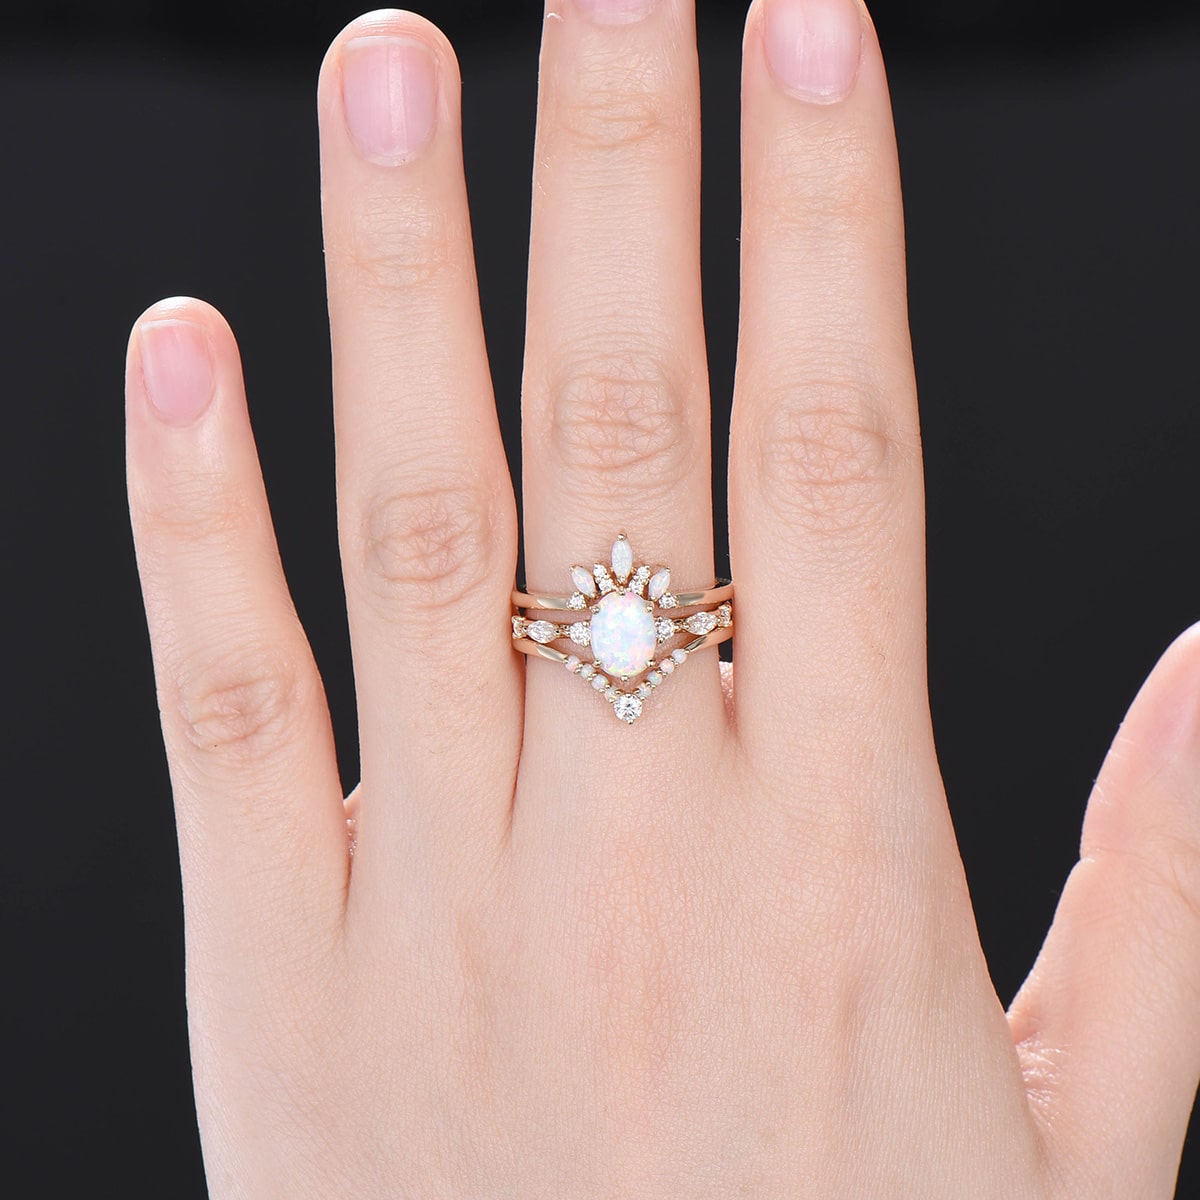 White opal engagement ring set Oval cut fire opal wedding rings women Vintage Rose gold unique bridal ring set Birthstone ring gift Art deco - PENFINE